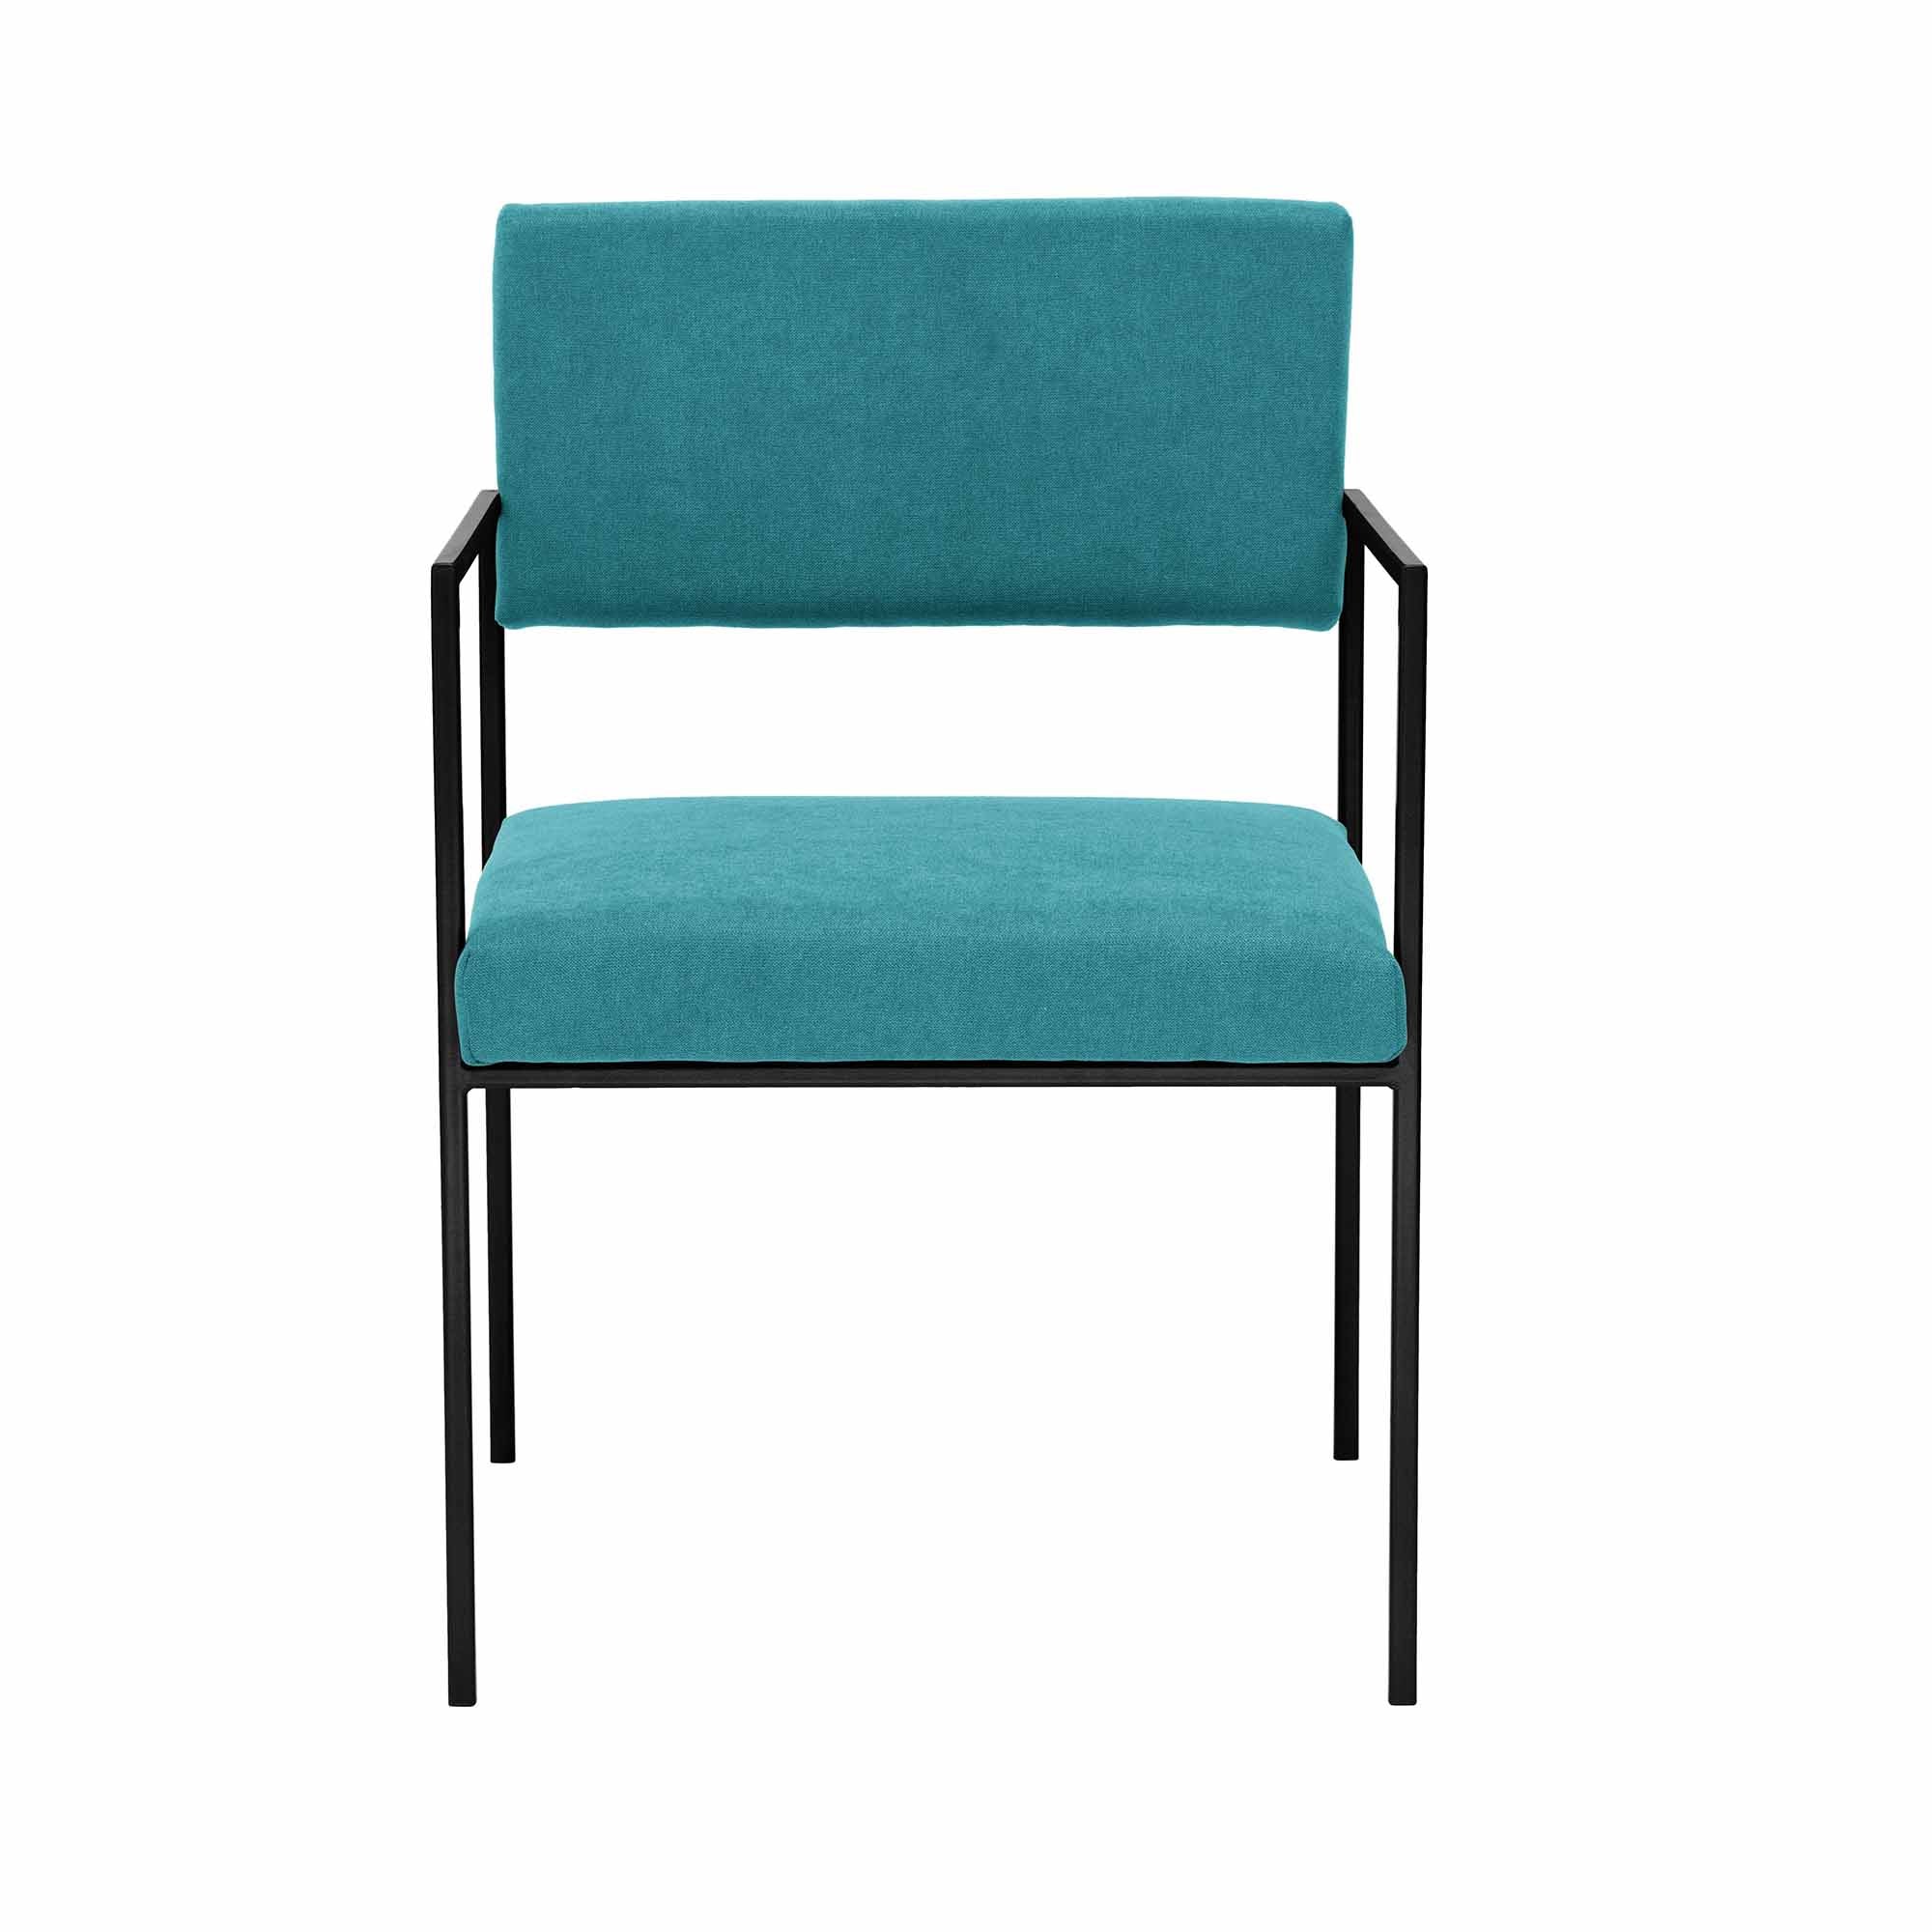 CUBE Armchair, Powder-Coated Steel Frame front view blue fabric, black frame